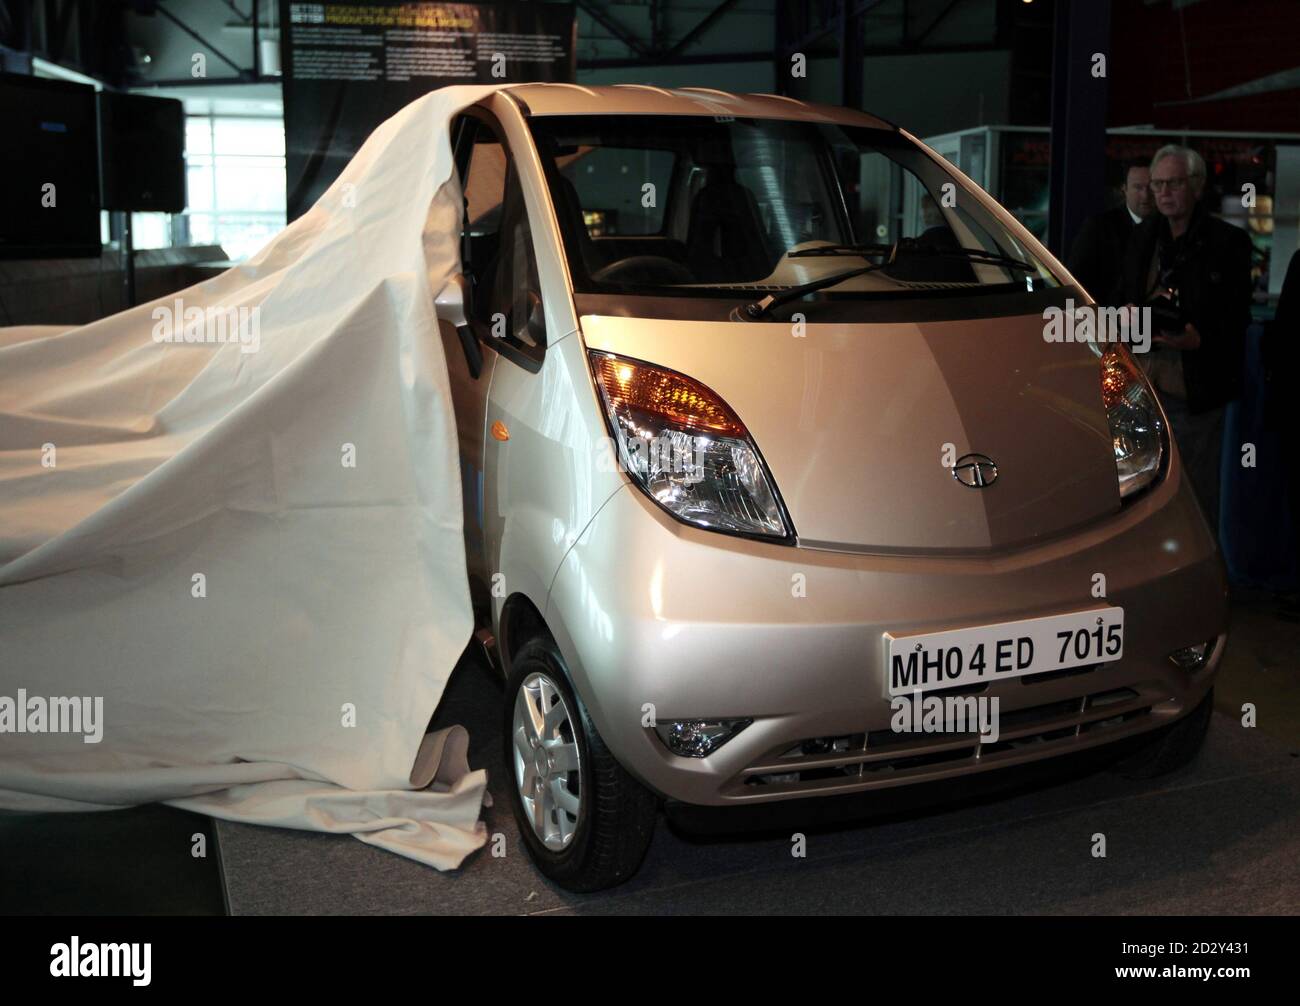 Tata Technologies unveils the Tata Nano vehicle as it is displayed for the first time in the U.S. at the Science Center in  Detroit, Michigan January 14, 2010. Unveiled last year in India by Tata Motors, the Tata Nano is targeted to families who have not previously been able to afford a car. REUTERS/Rebecca Cook  (UNITED STATES - Tags: TRANSPORT BUSINESS) Stock Photo